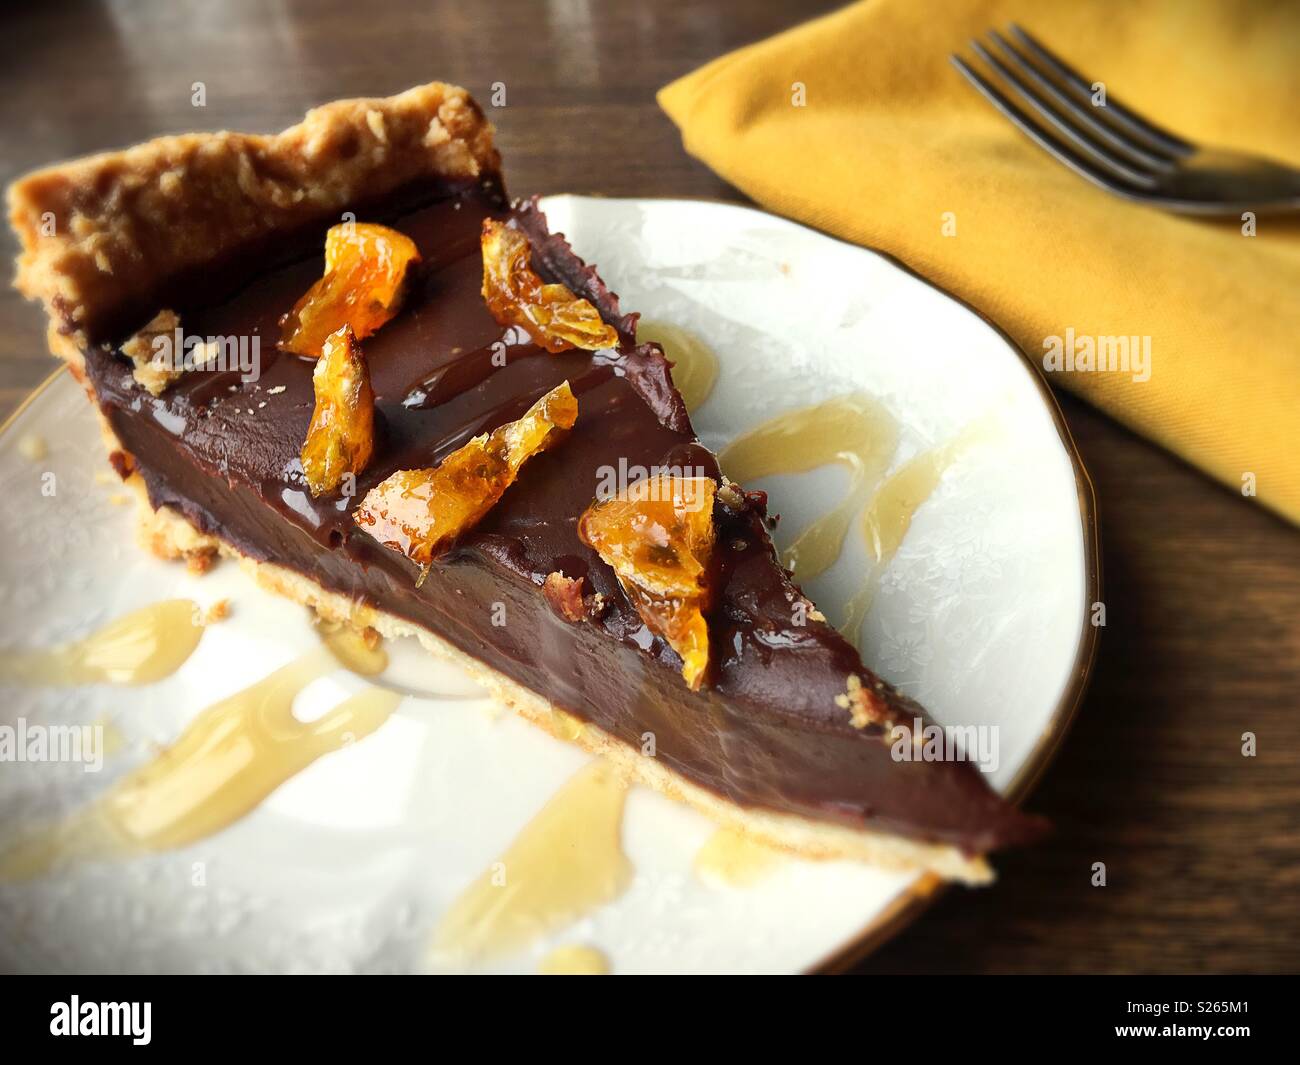 A slice of vegan dark chocolate pie topped with candied orange. Stock Photo